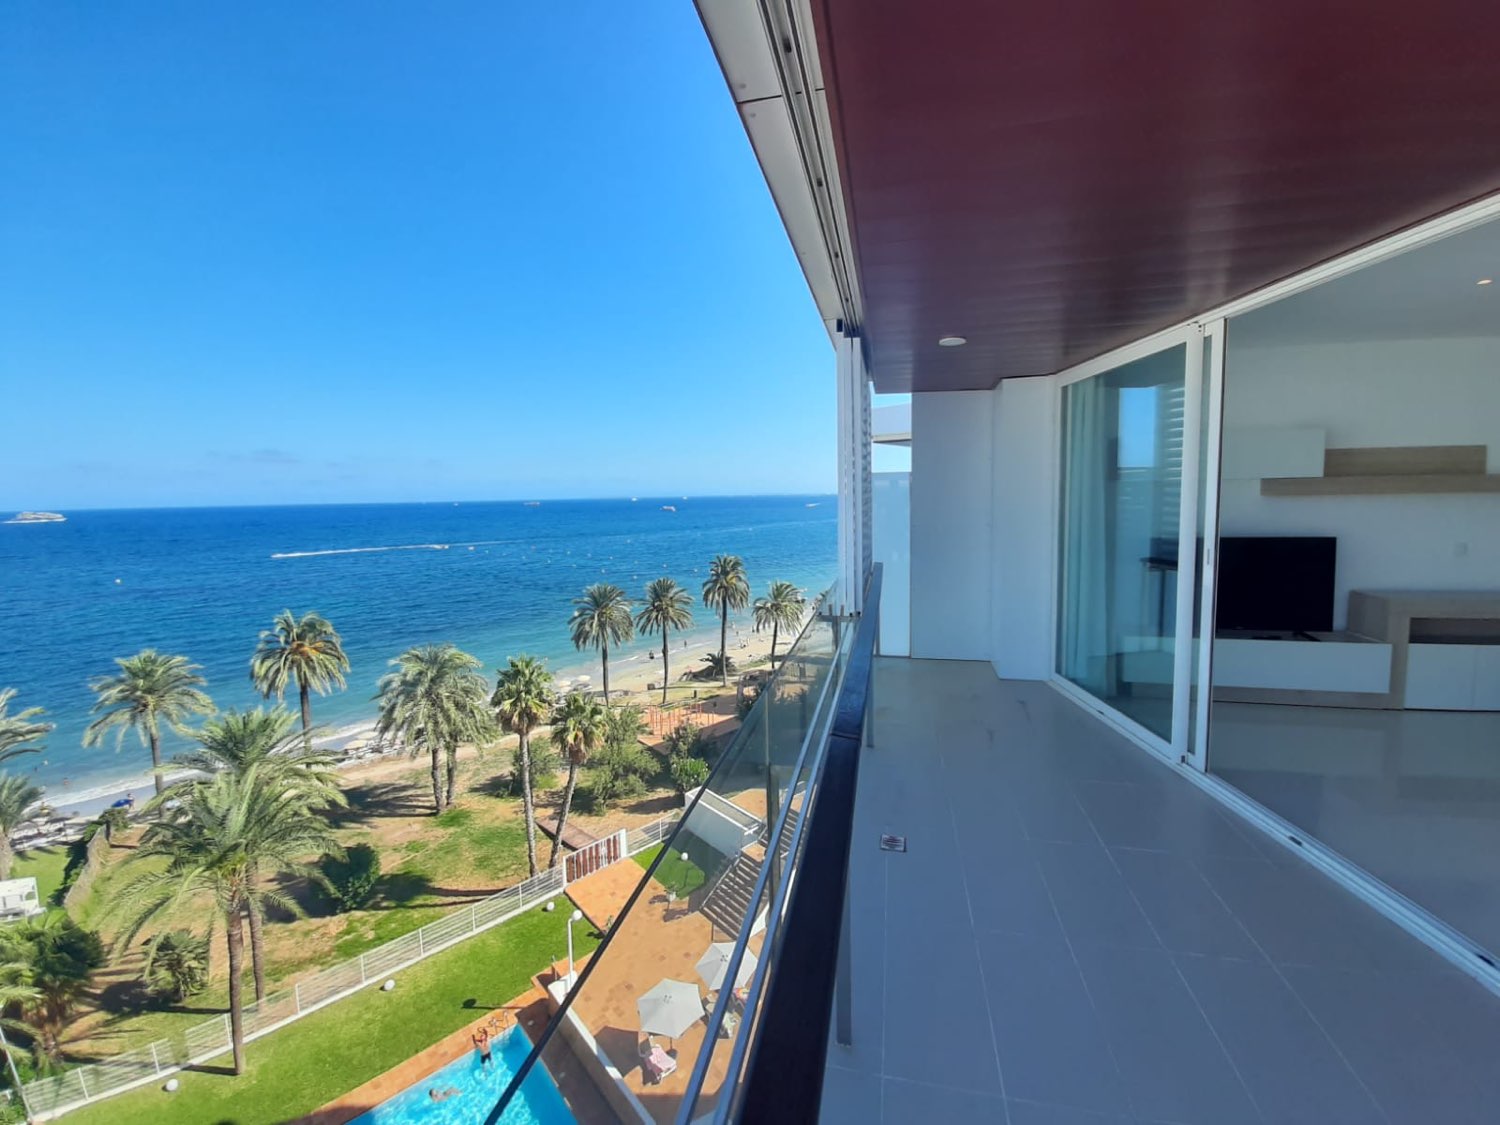 Fantastic apartment with frontal sea views, for sale in Playa d'en Bossa, Ibiza